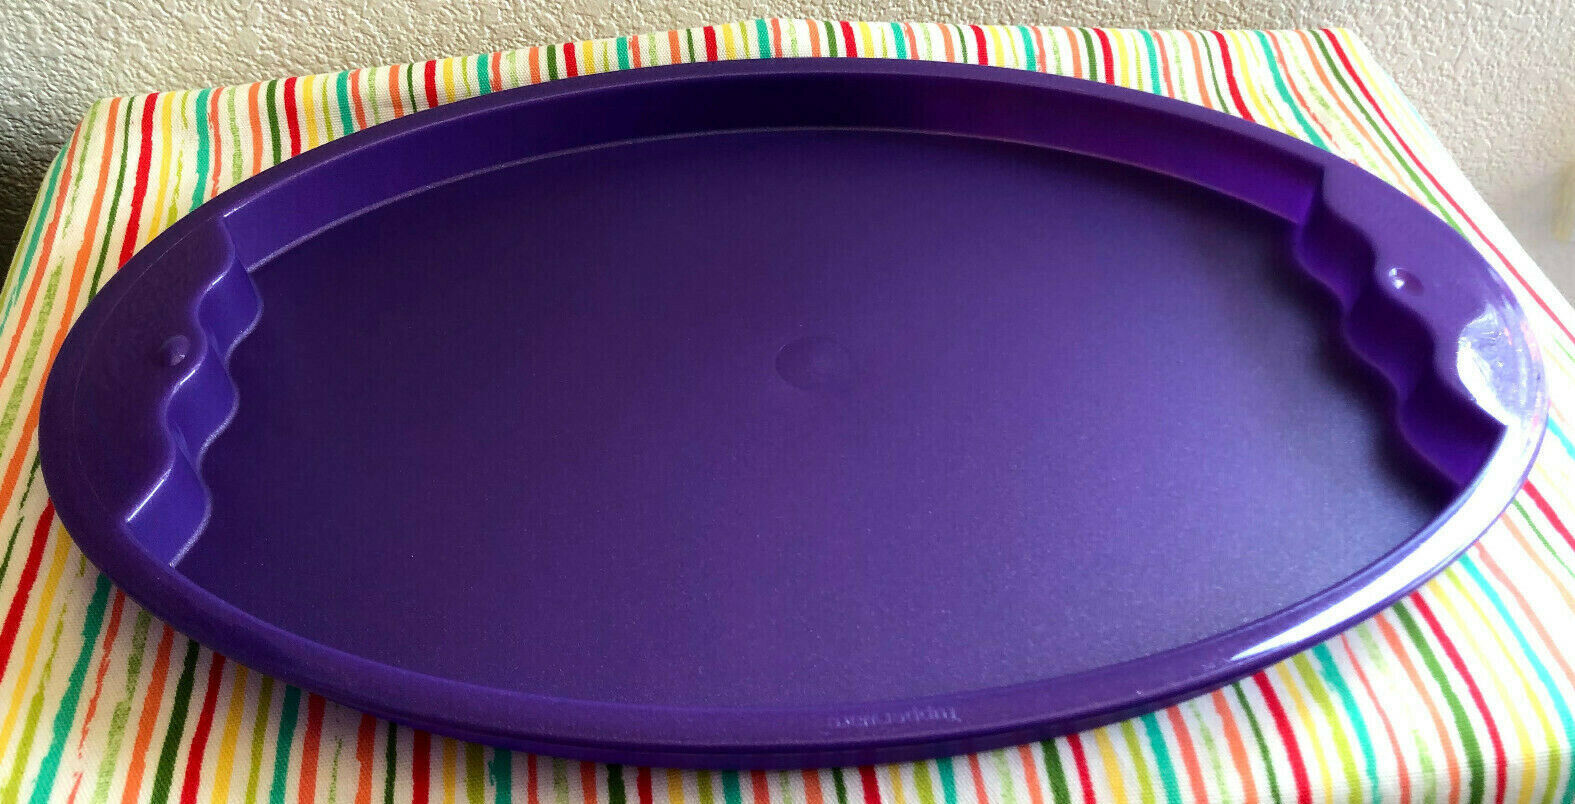 Tupperware Impressions Serving Tray Multi Use Tray Indoor and Outdoor Purple New